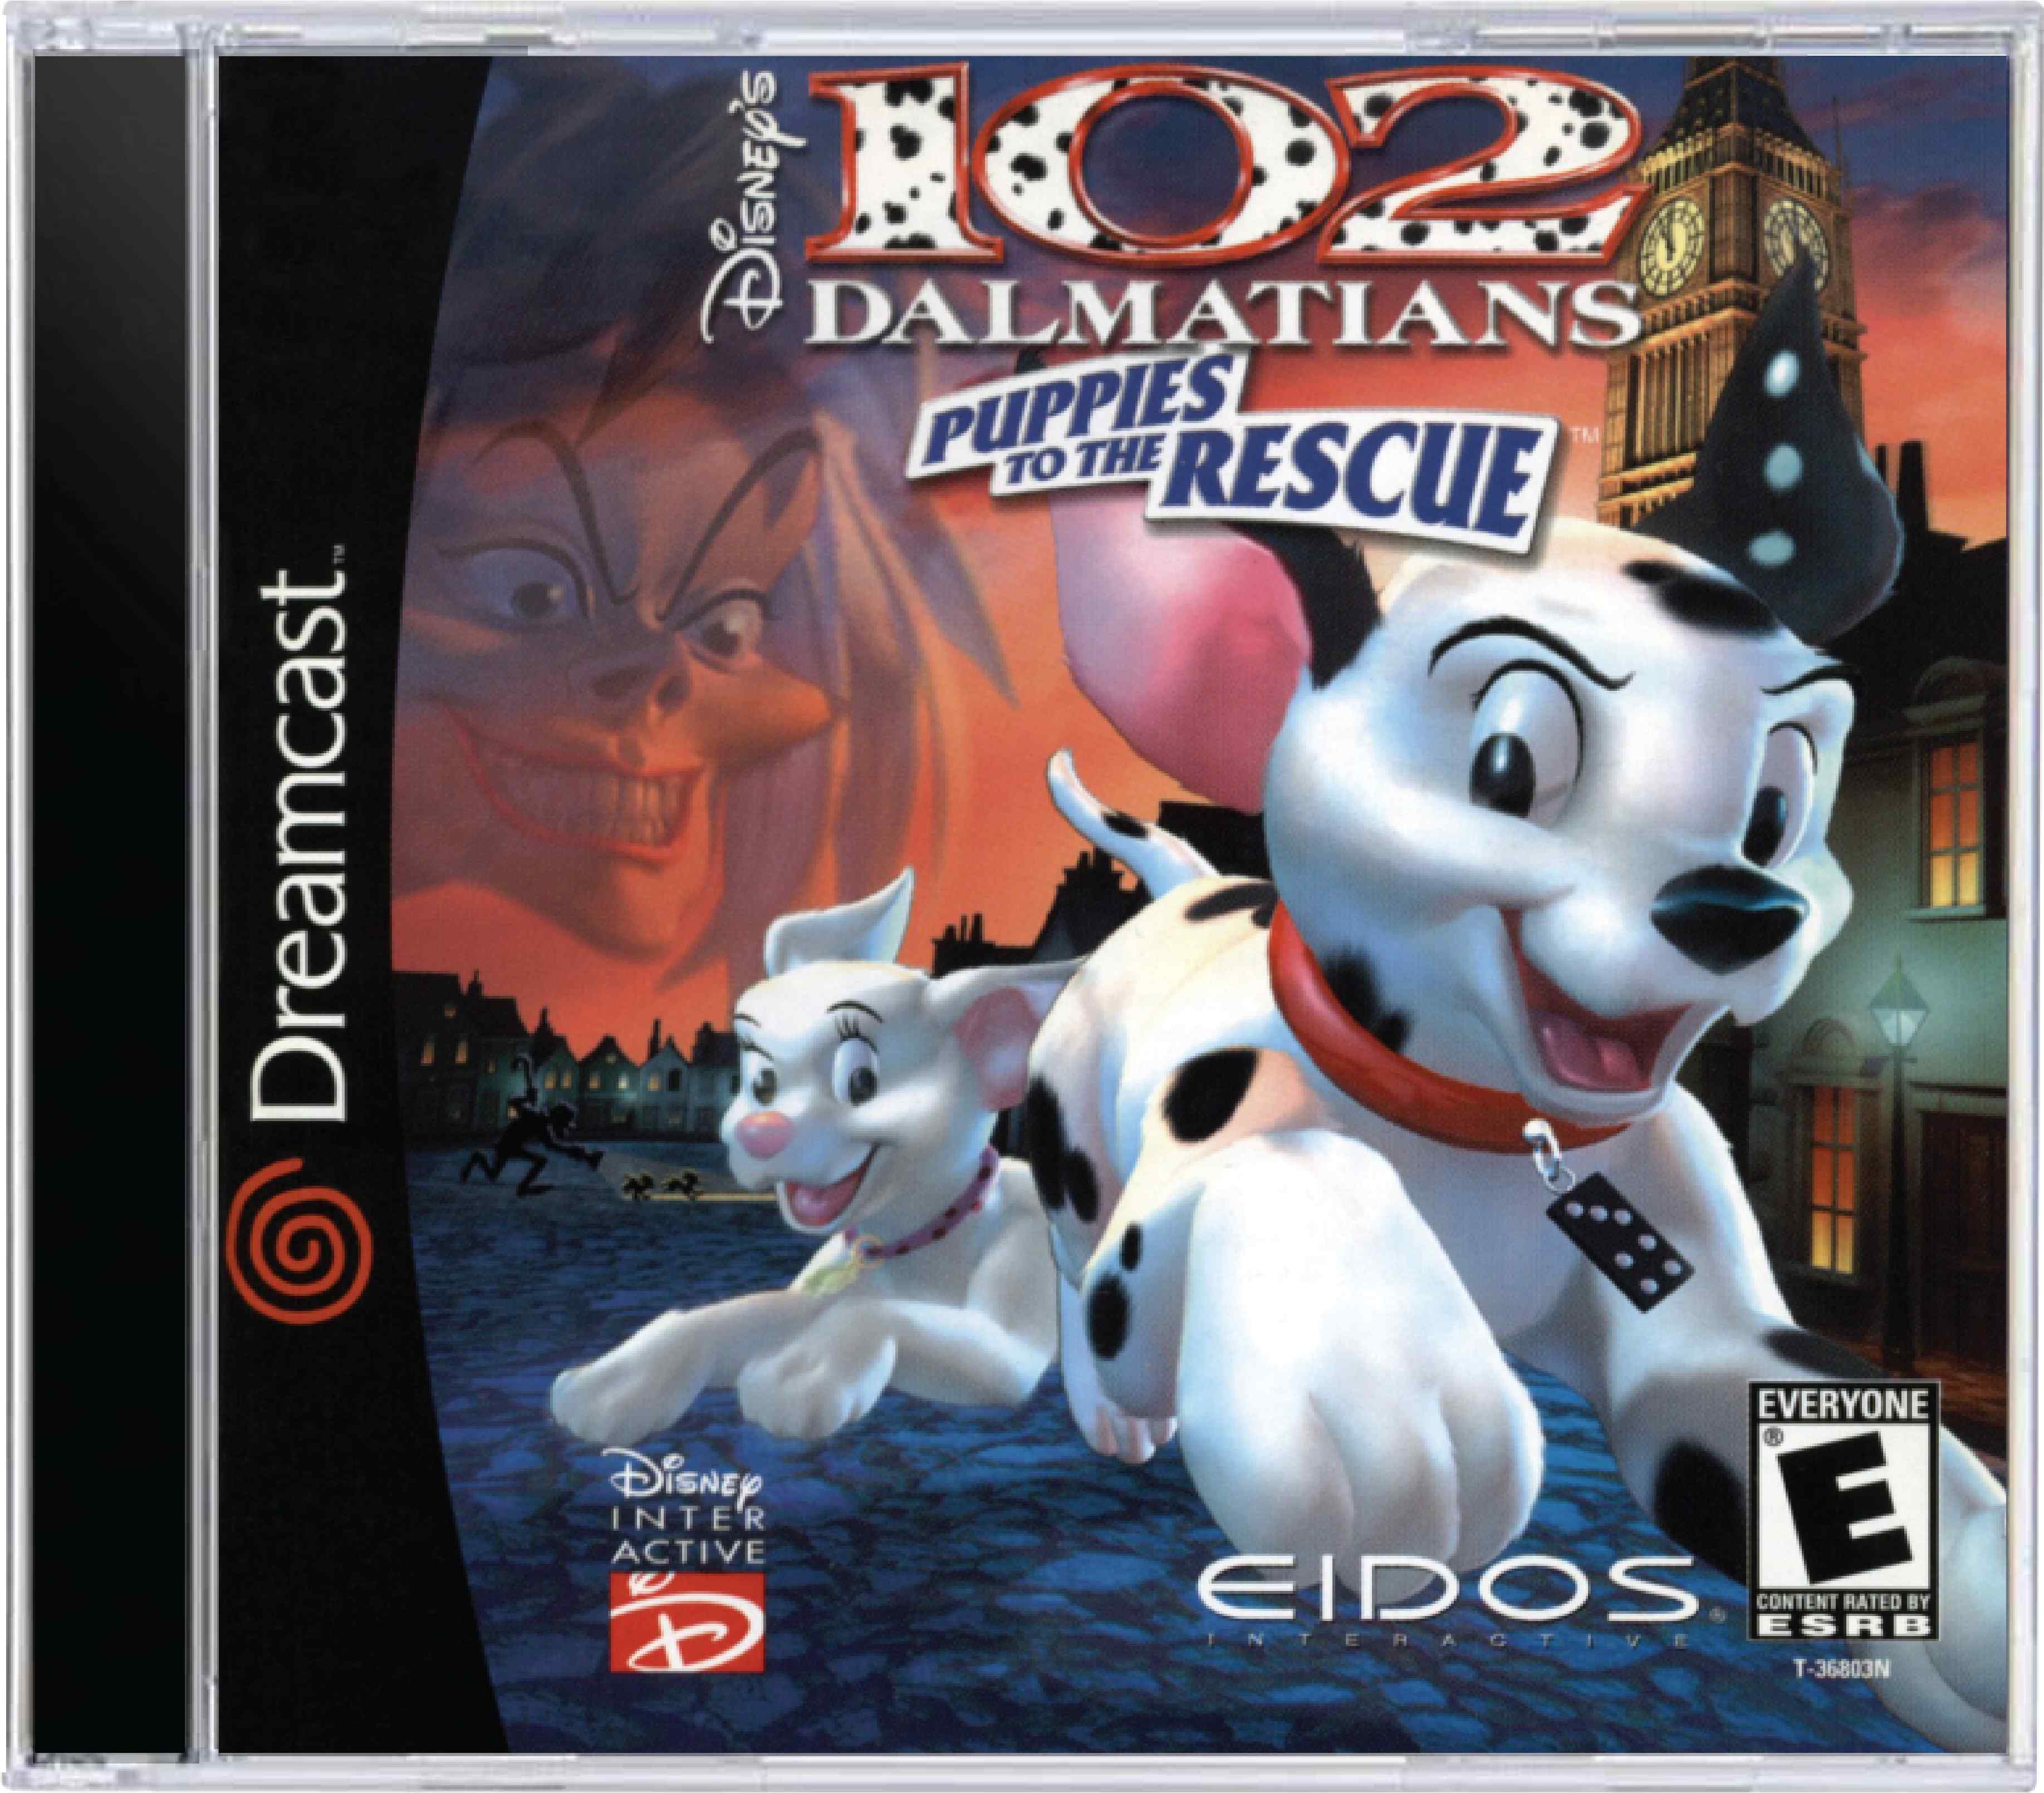 102 Dalmatians Puppies to the Rescue Cover Art